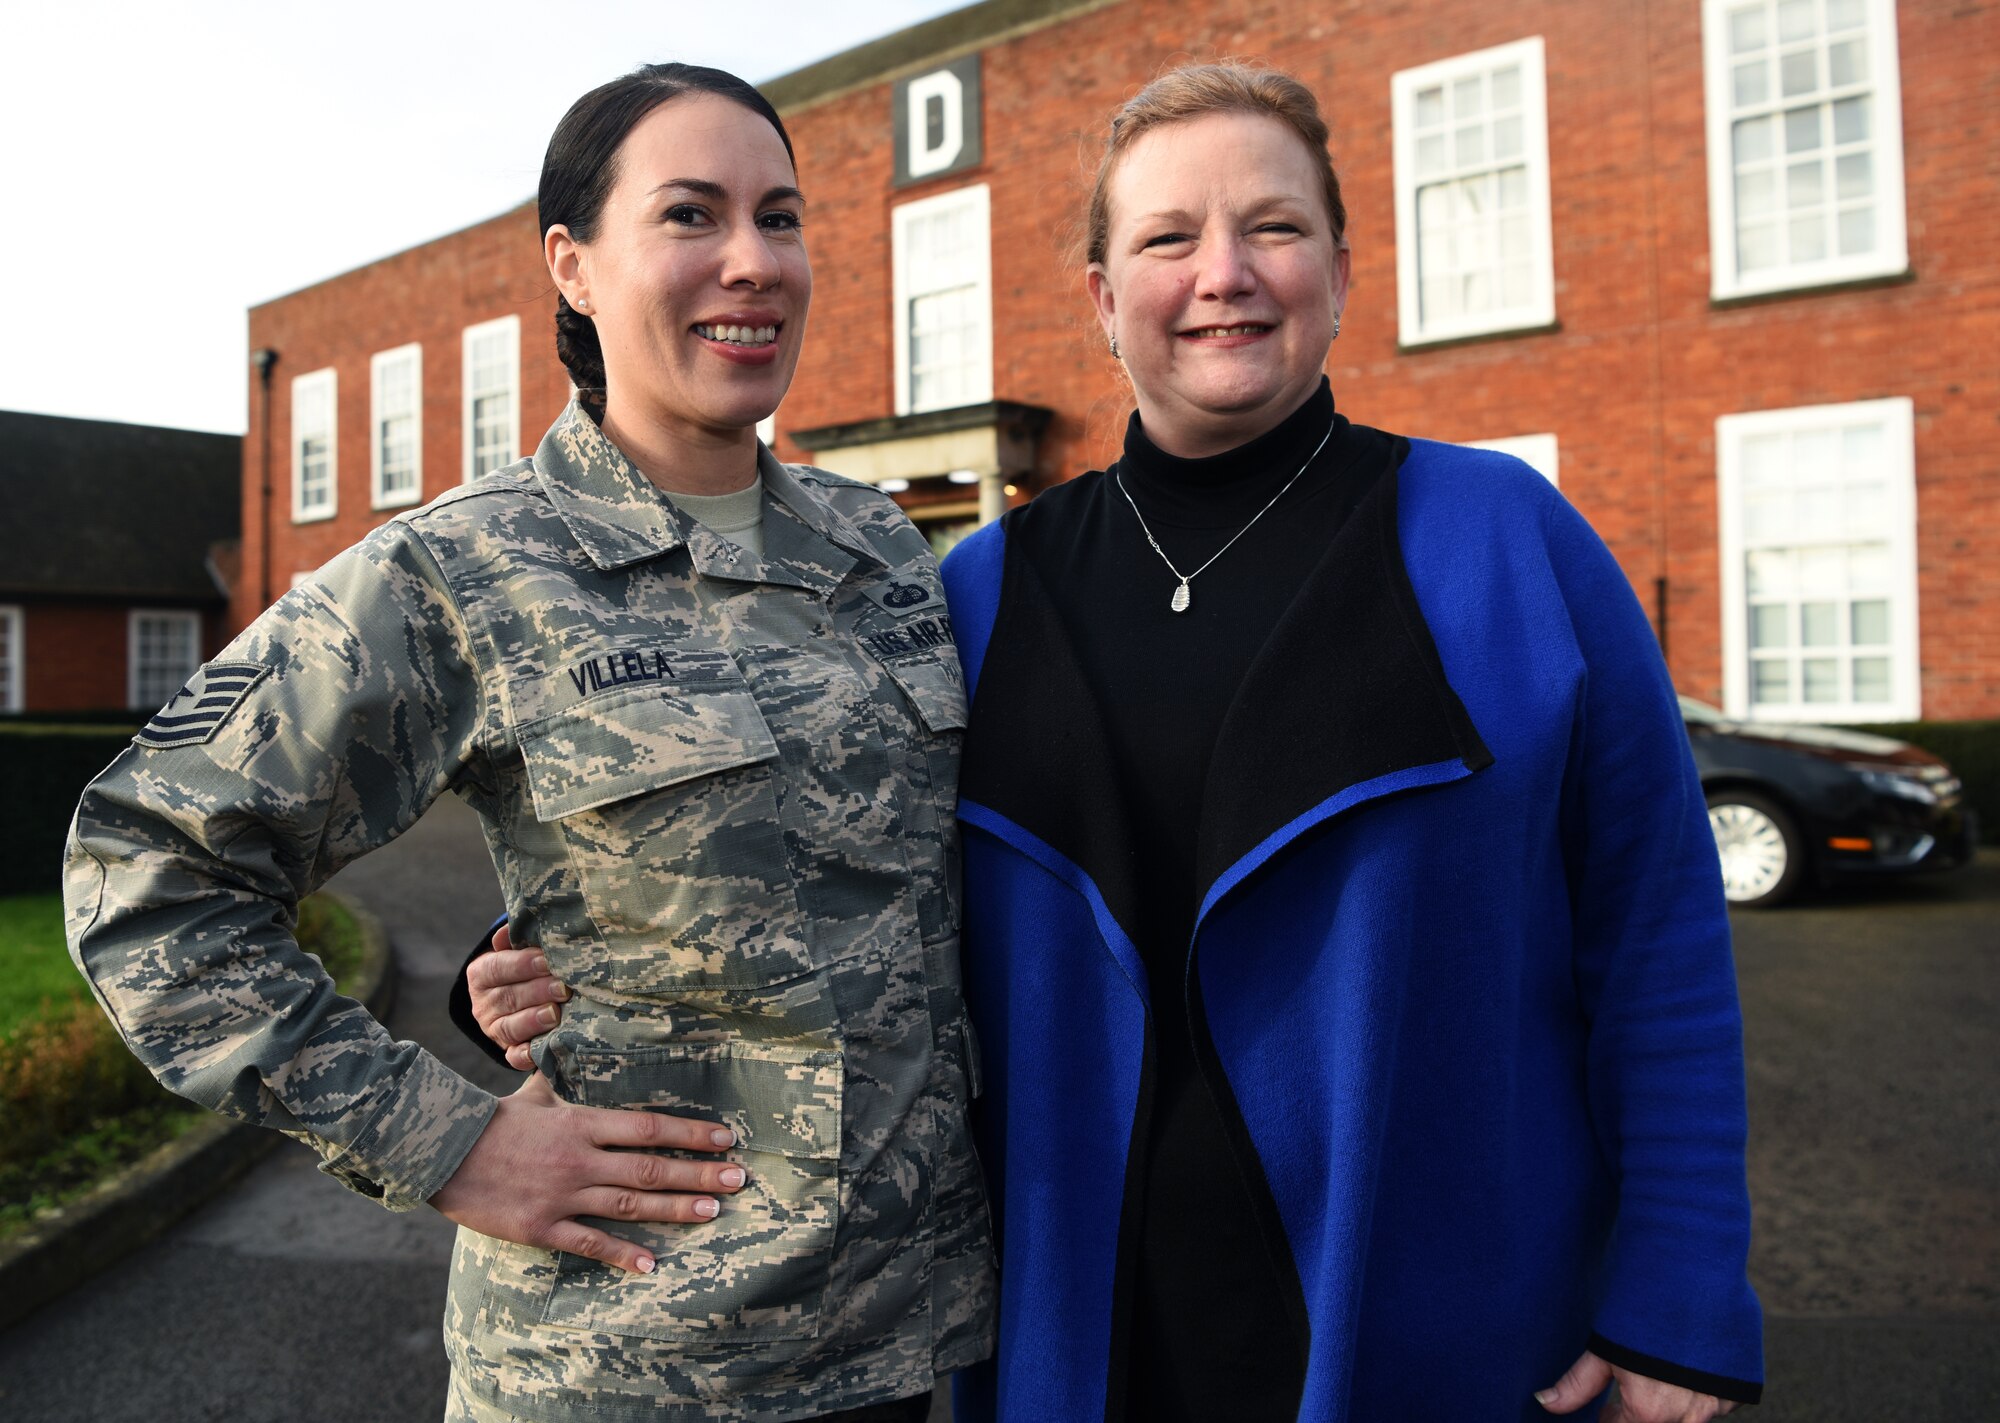 U.S. Air Force Technical Sgt. Genevieve Villela, 100th Air Refueling Wing NCO-in-charge of protocol, and Rebekah Hedstrom, 100th ARW Chief of Protocol, pose for a photo at RAF Mildenhall, England, Jan. 16, 2020. The Protocol Office is in charge of ensuring every visit and ceremony on RAF Mildenhall goes to plan according to Air Force standards. (U.S. Air Force photo by Senior Airman Brandon Esau)